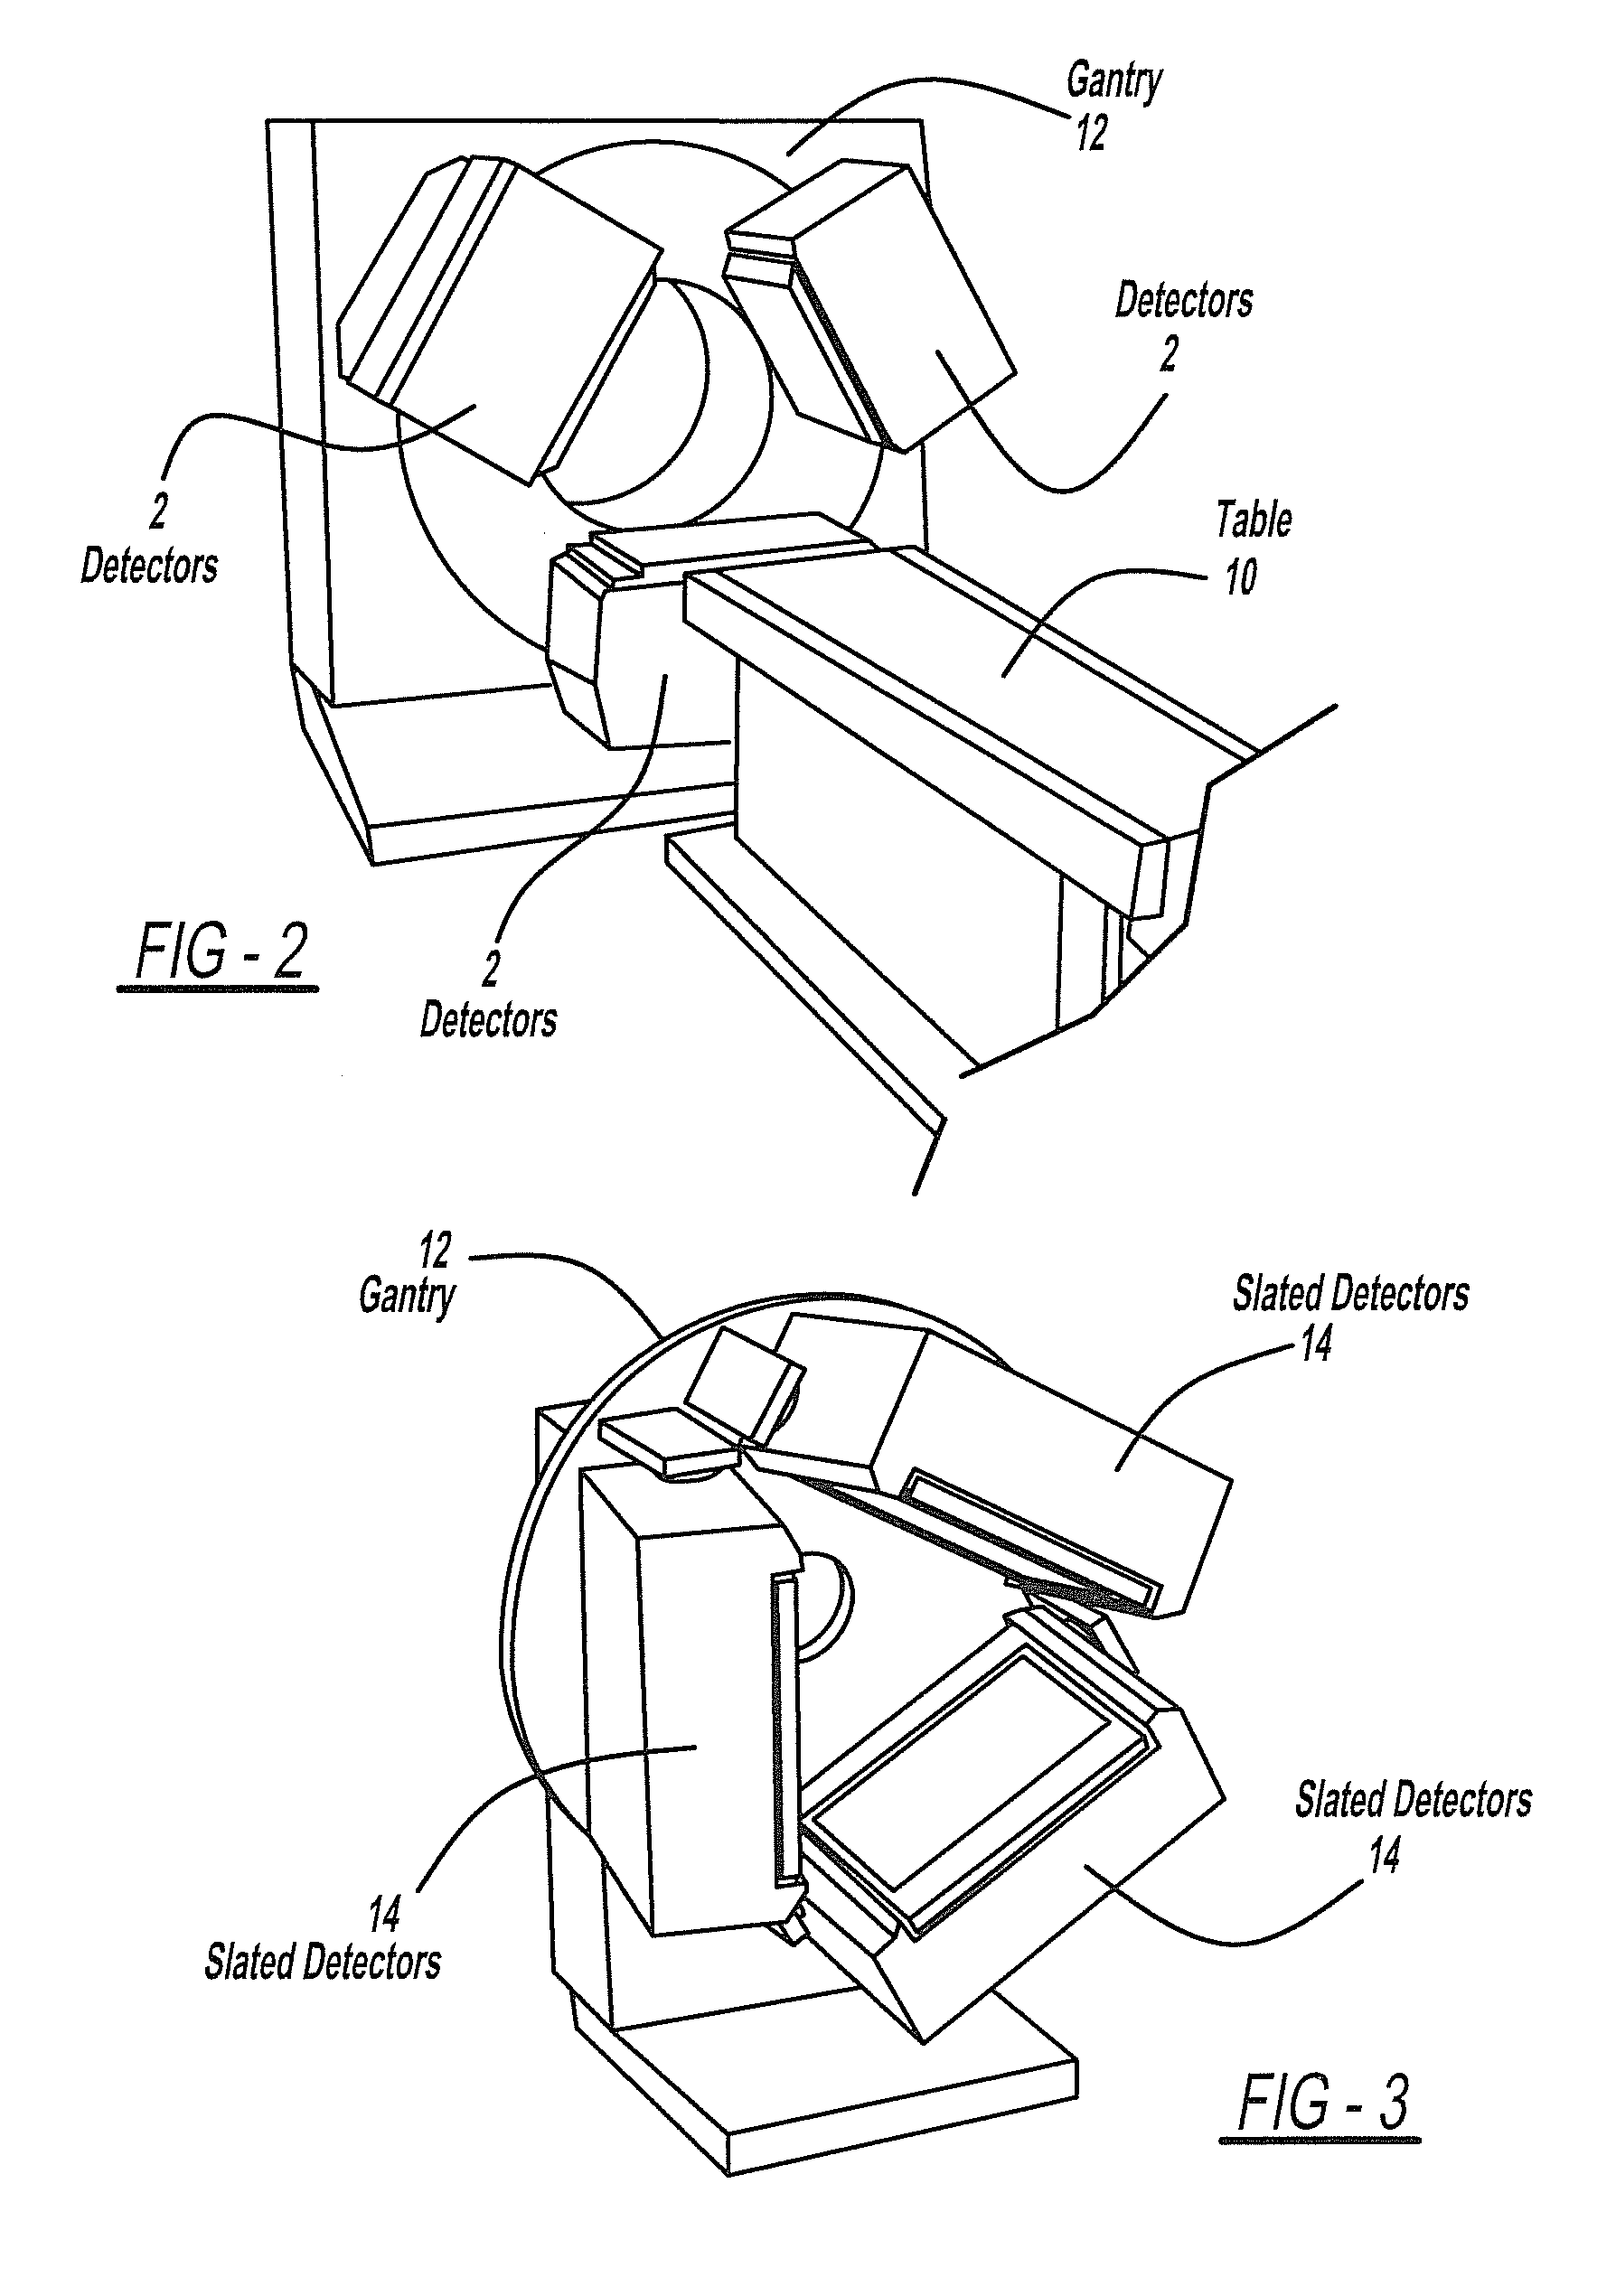 Gamma camera system with slanted detectors, slanted collimators, and a support hood